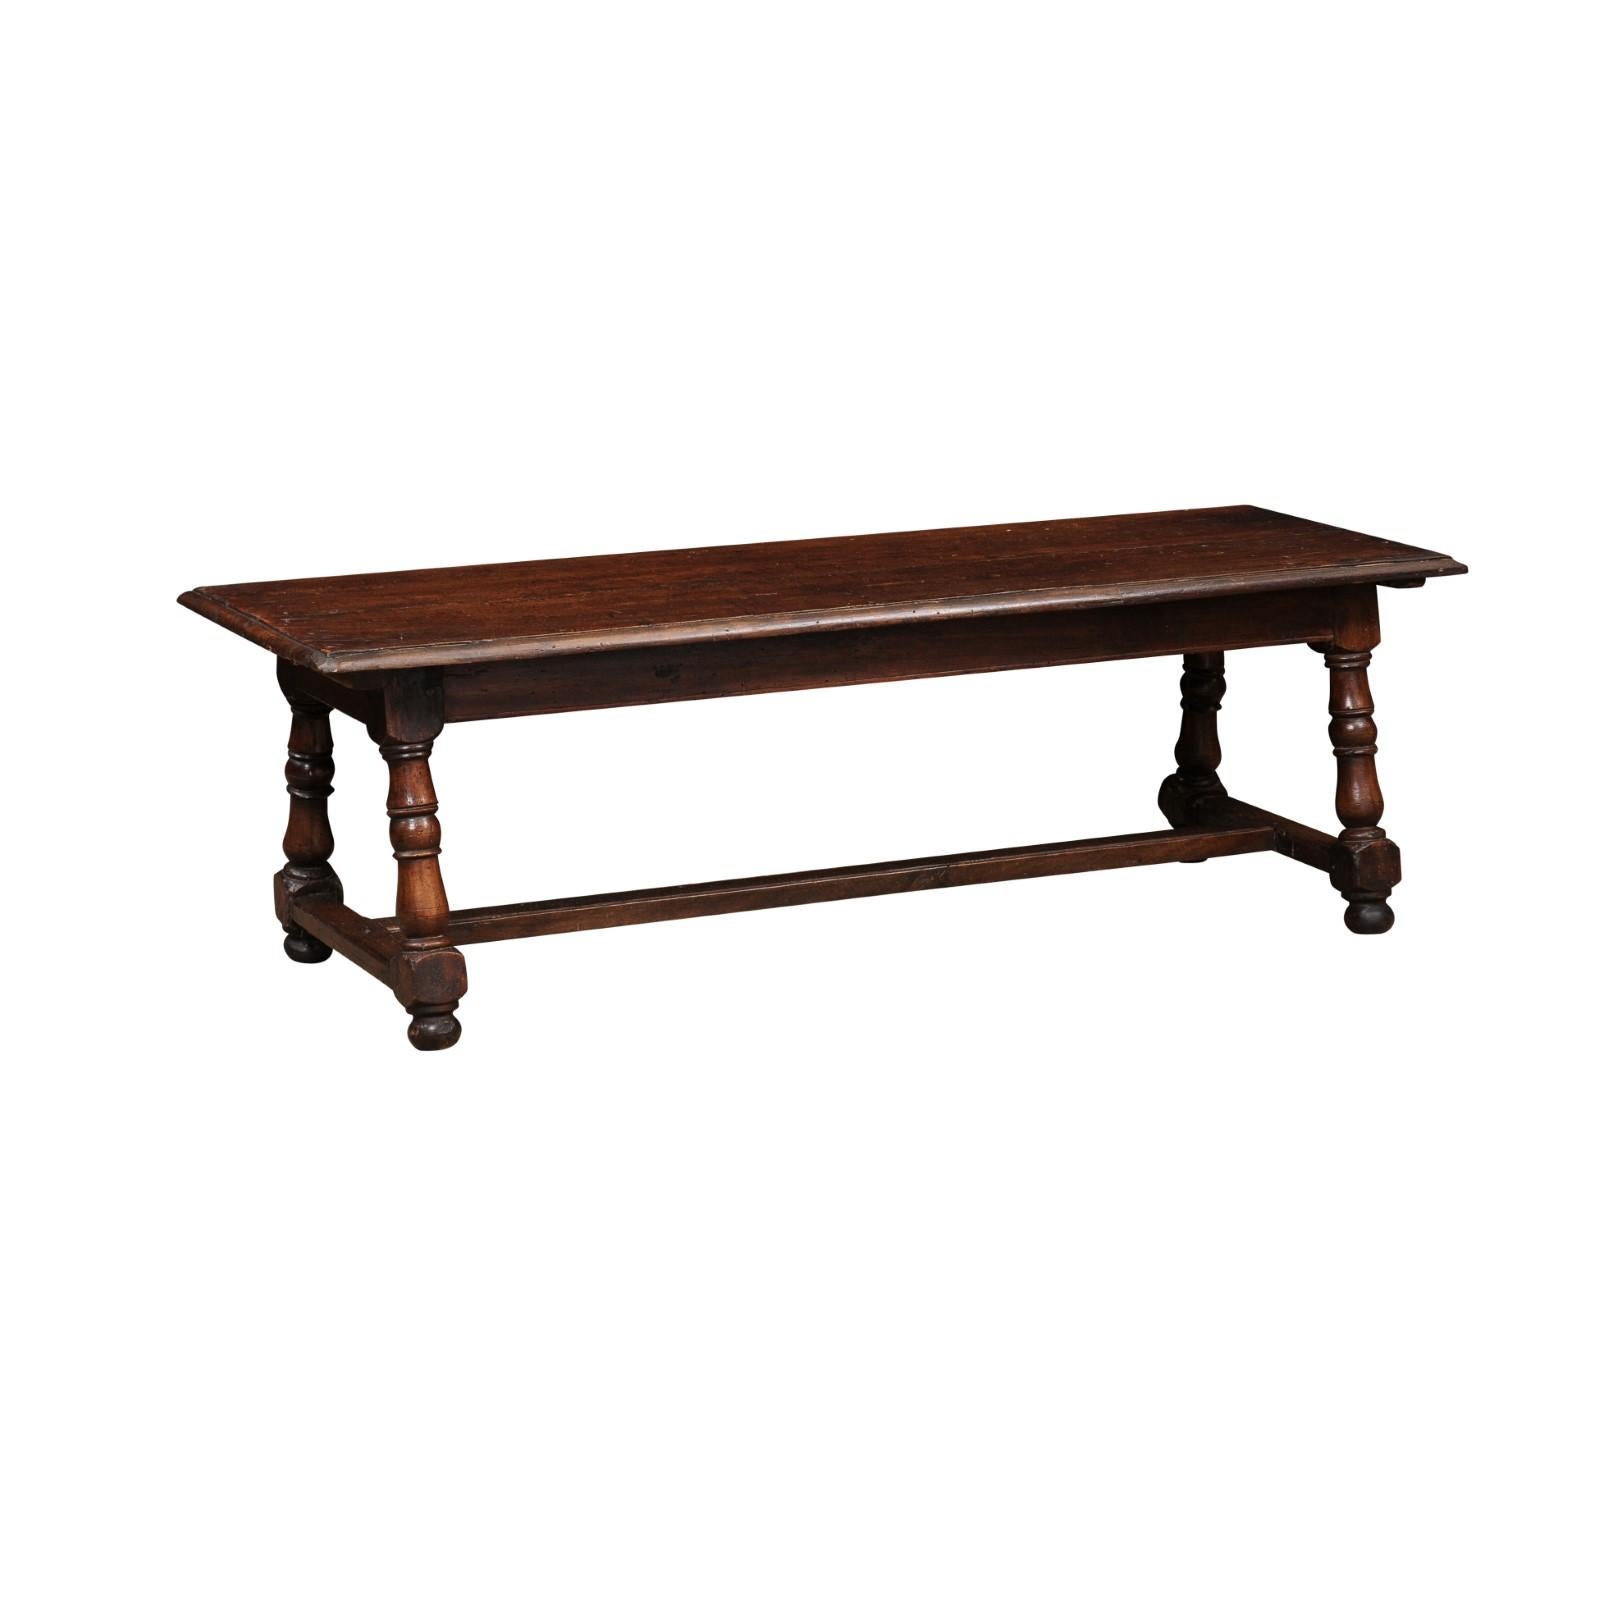 French Walnut Bench / Coffee Table with Turned Legs & H Form Stretcher, 19th Century
